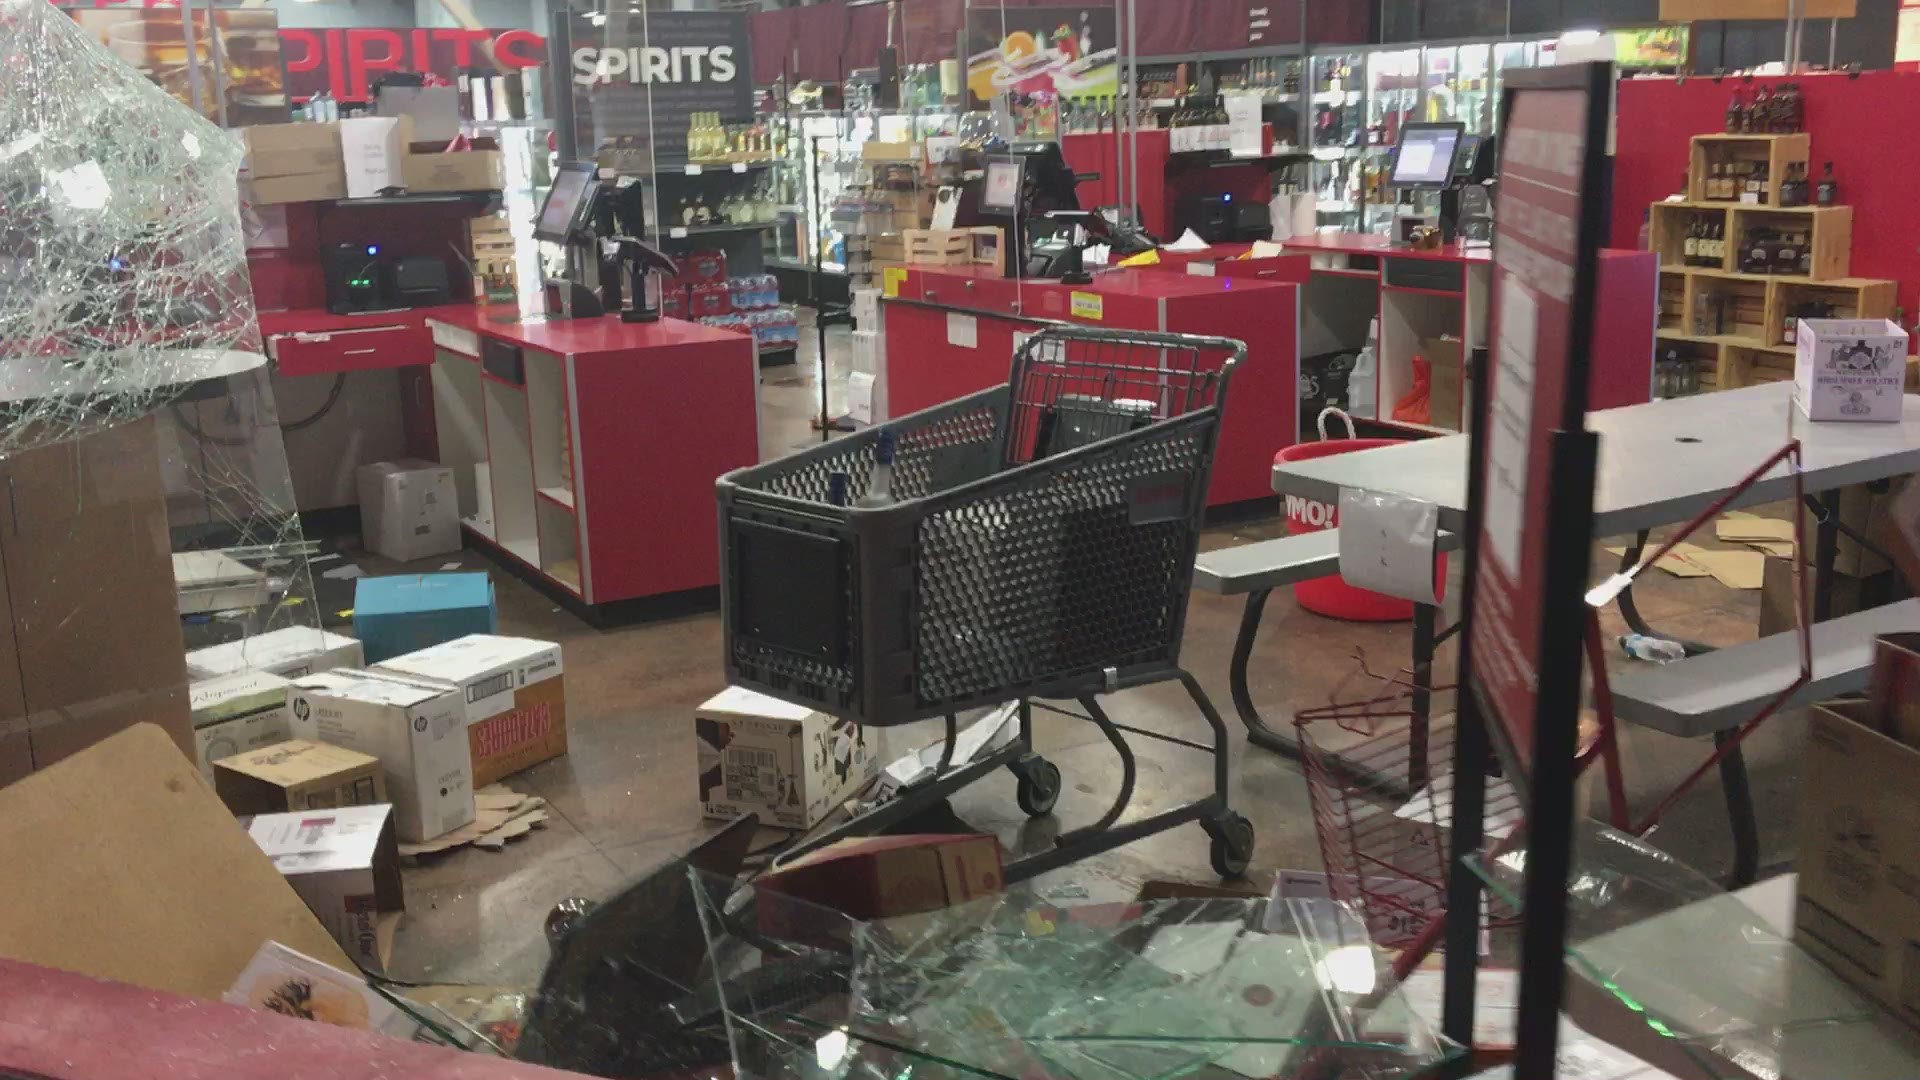 Downtown Sacramento Bevmo damaged in protests Saturday night.